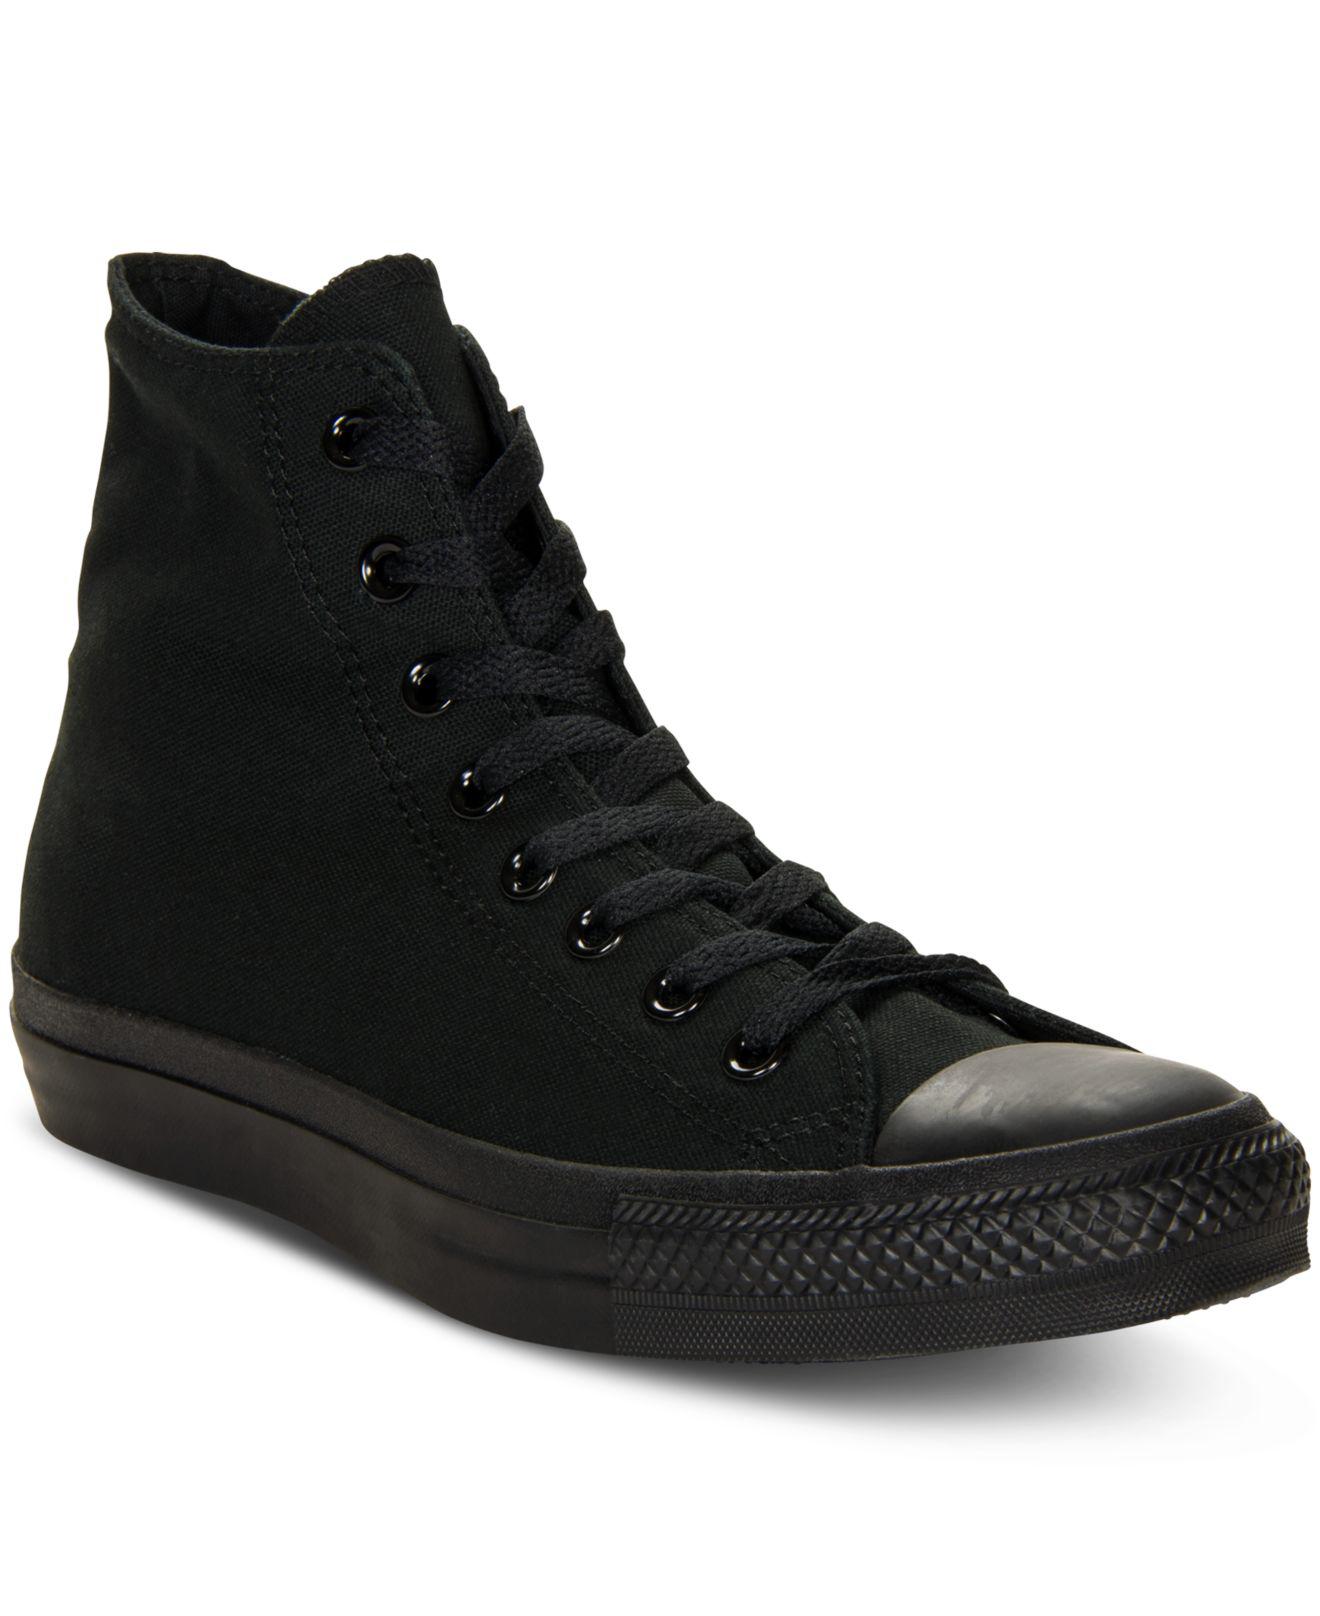 Lyst - Converse Monochrome Chuck Taylor Hi Tops in Black for Men - Save 8%